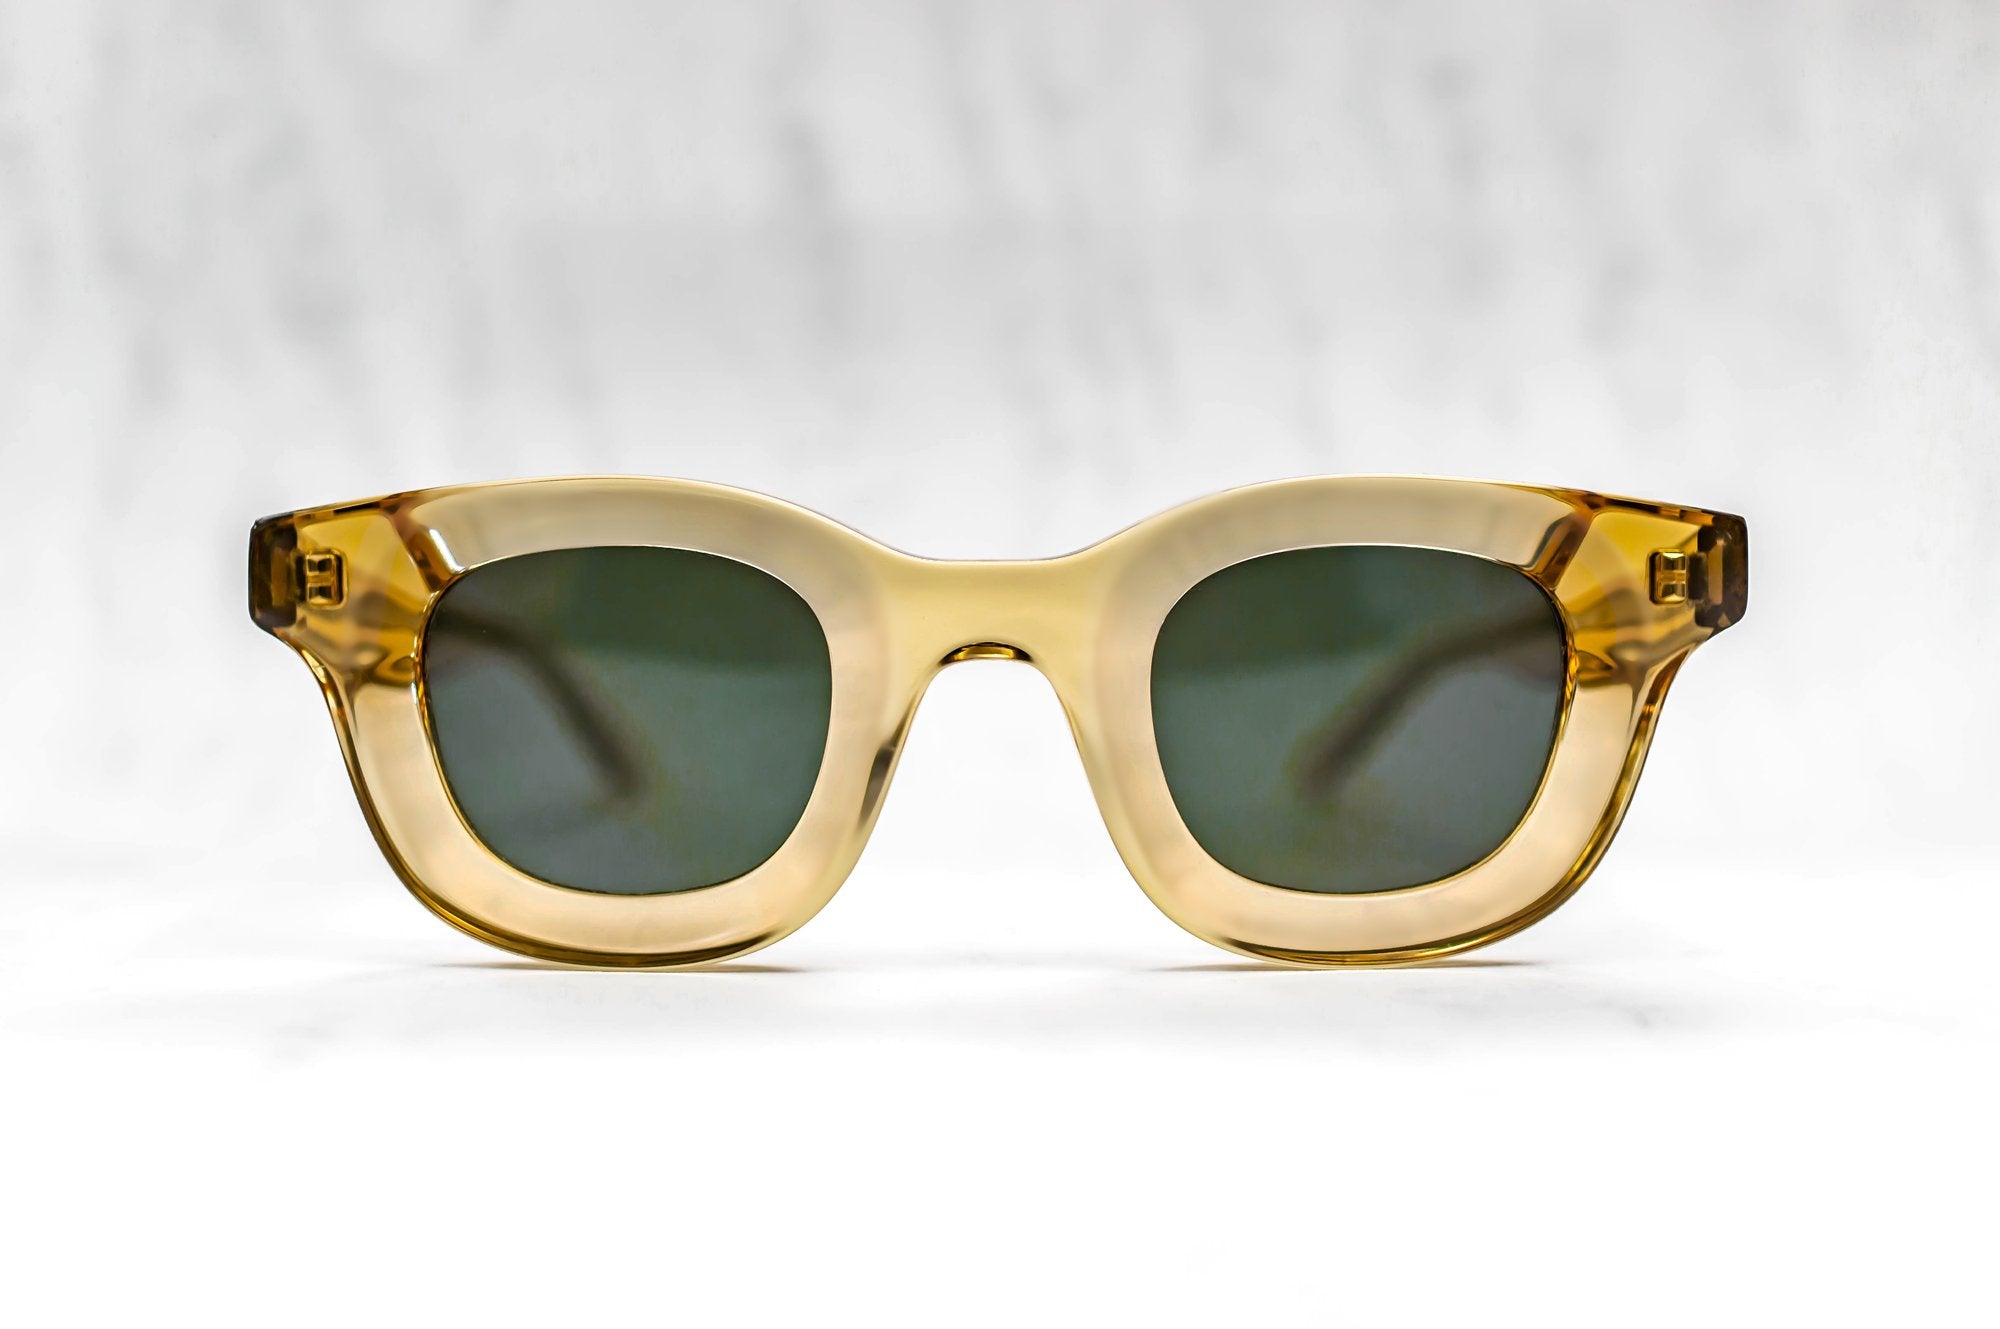 RHUDE x Thierry Lasry - Rhodeo Sunglasses in Transparent Honey w/ Flat Green Lenses (656)